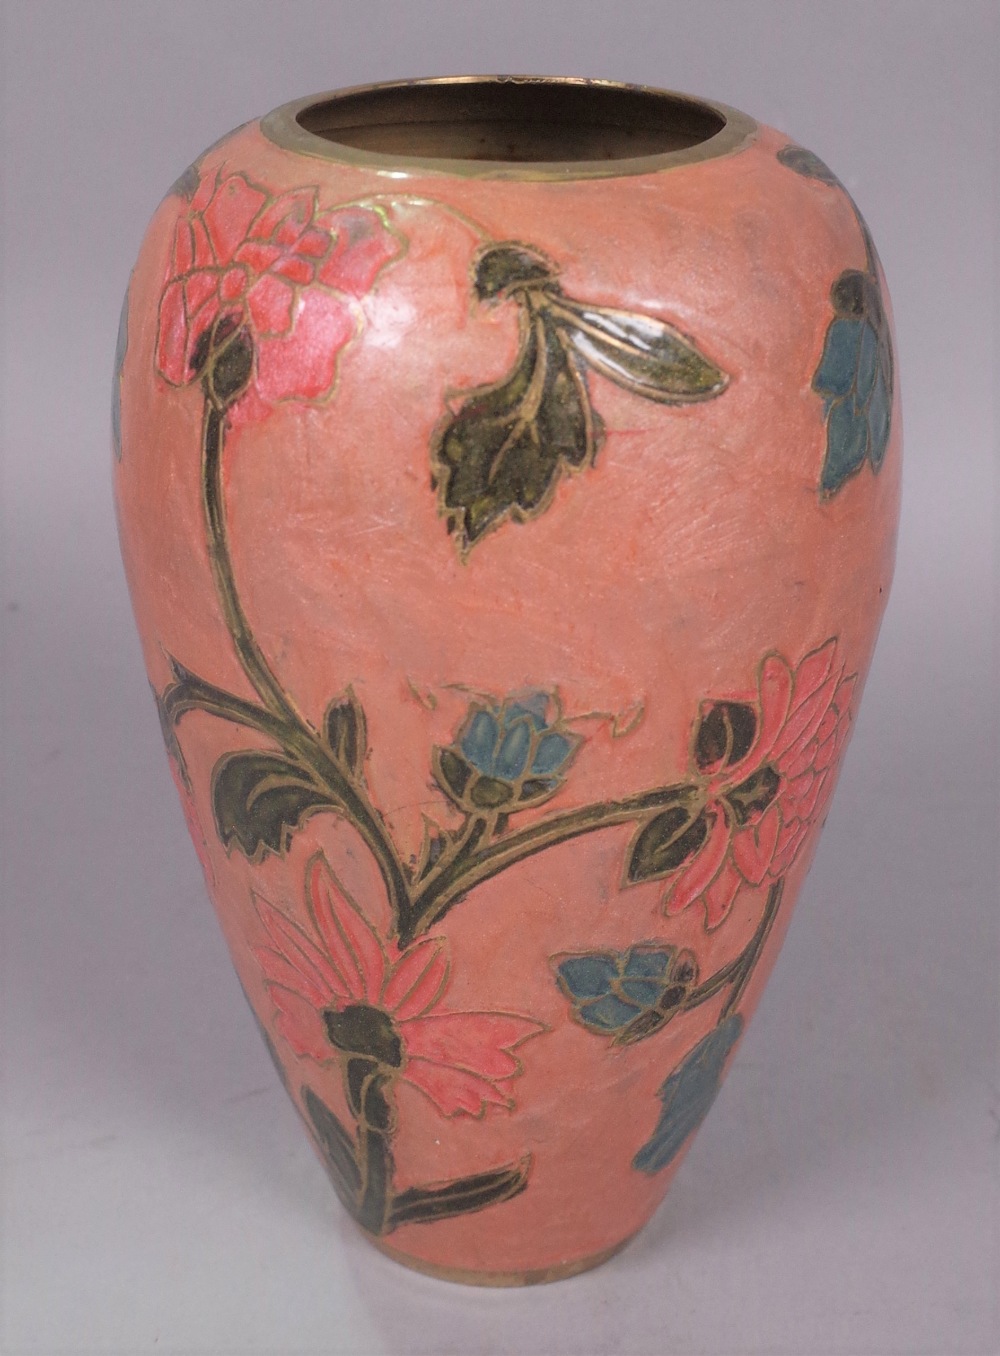 AN UNUSUAL 20TH CENTURY GILT METAL AND ENAMELLED VASE